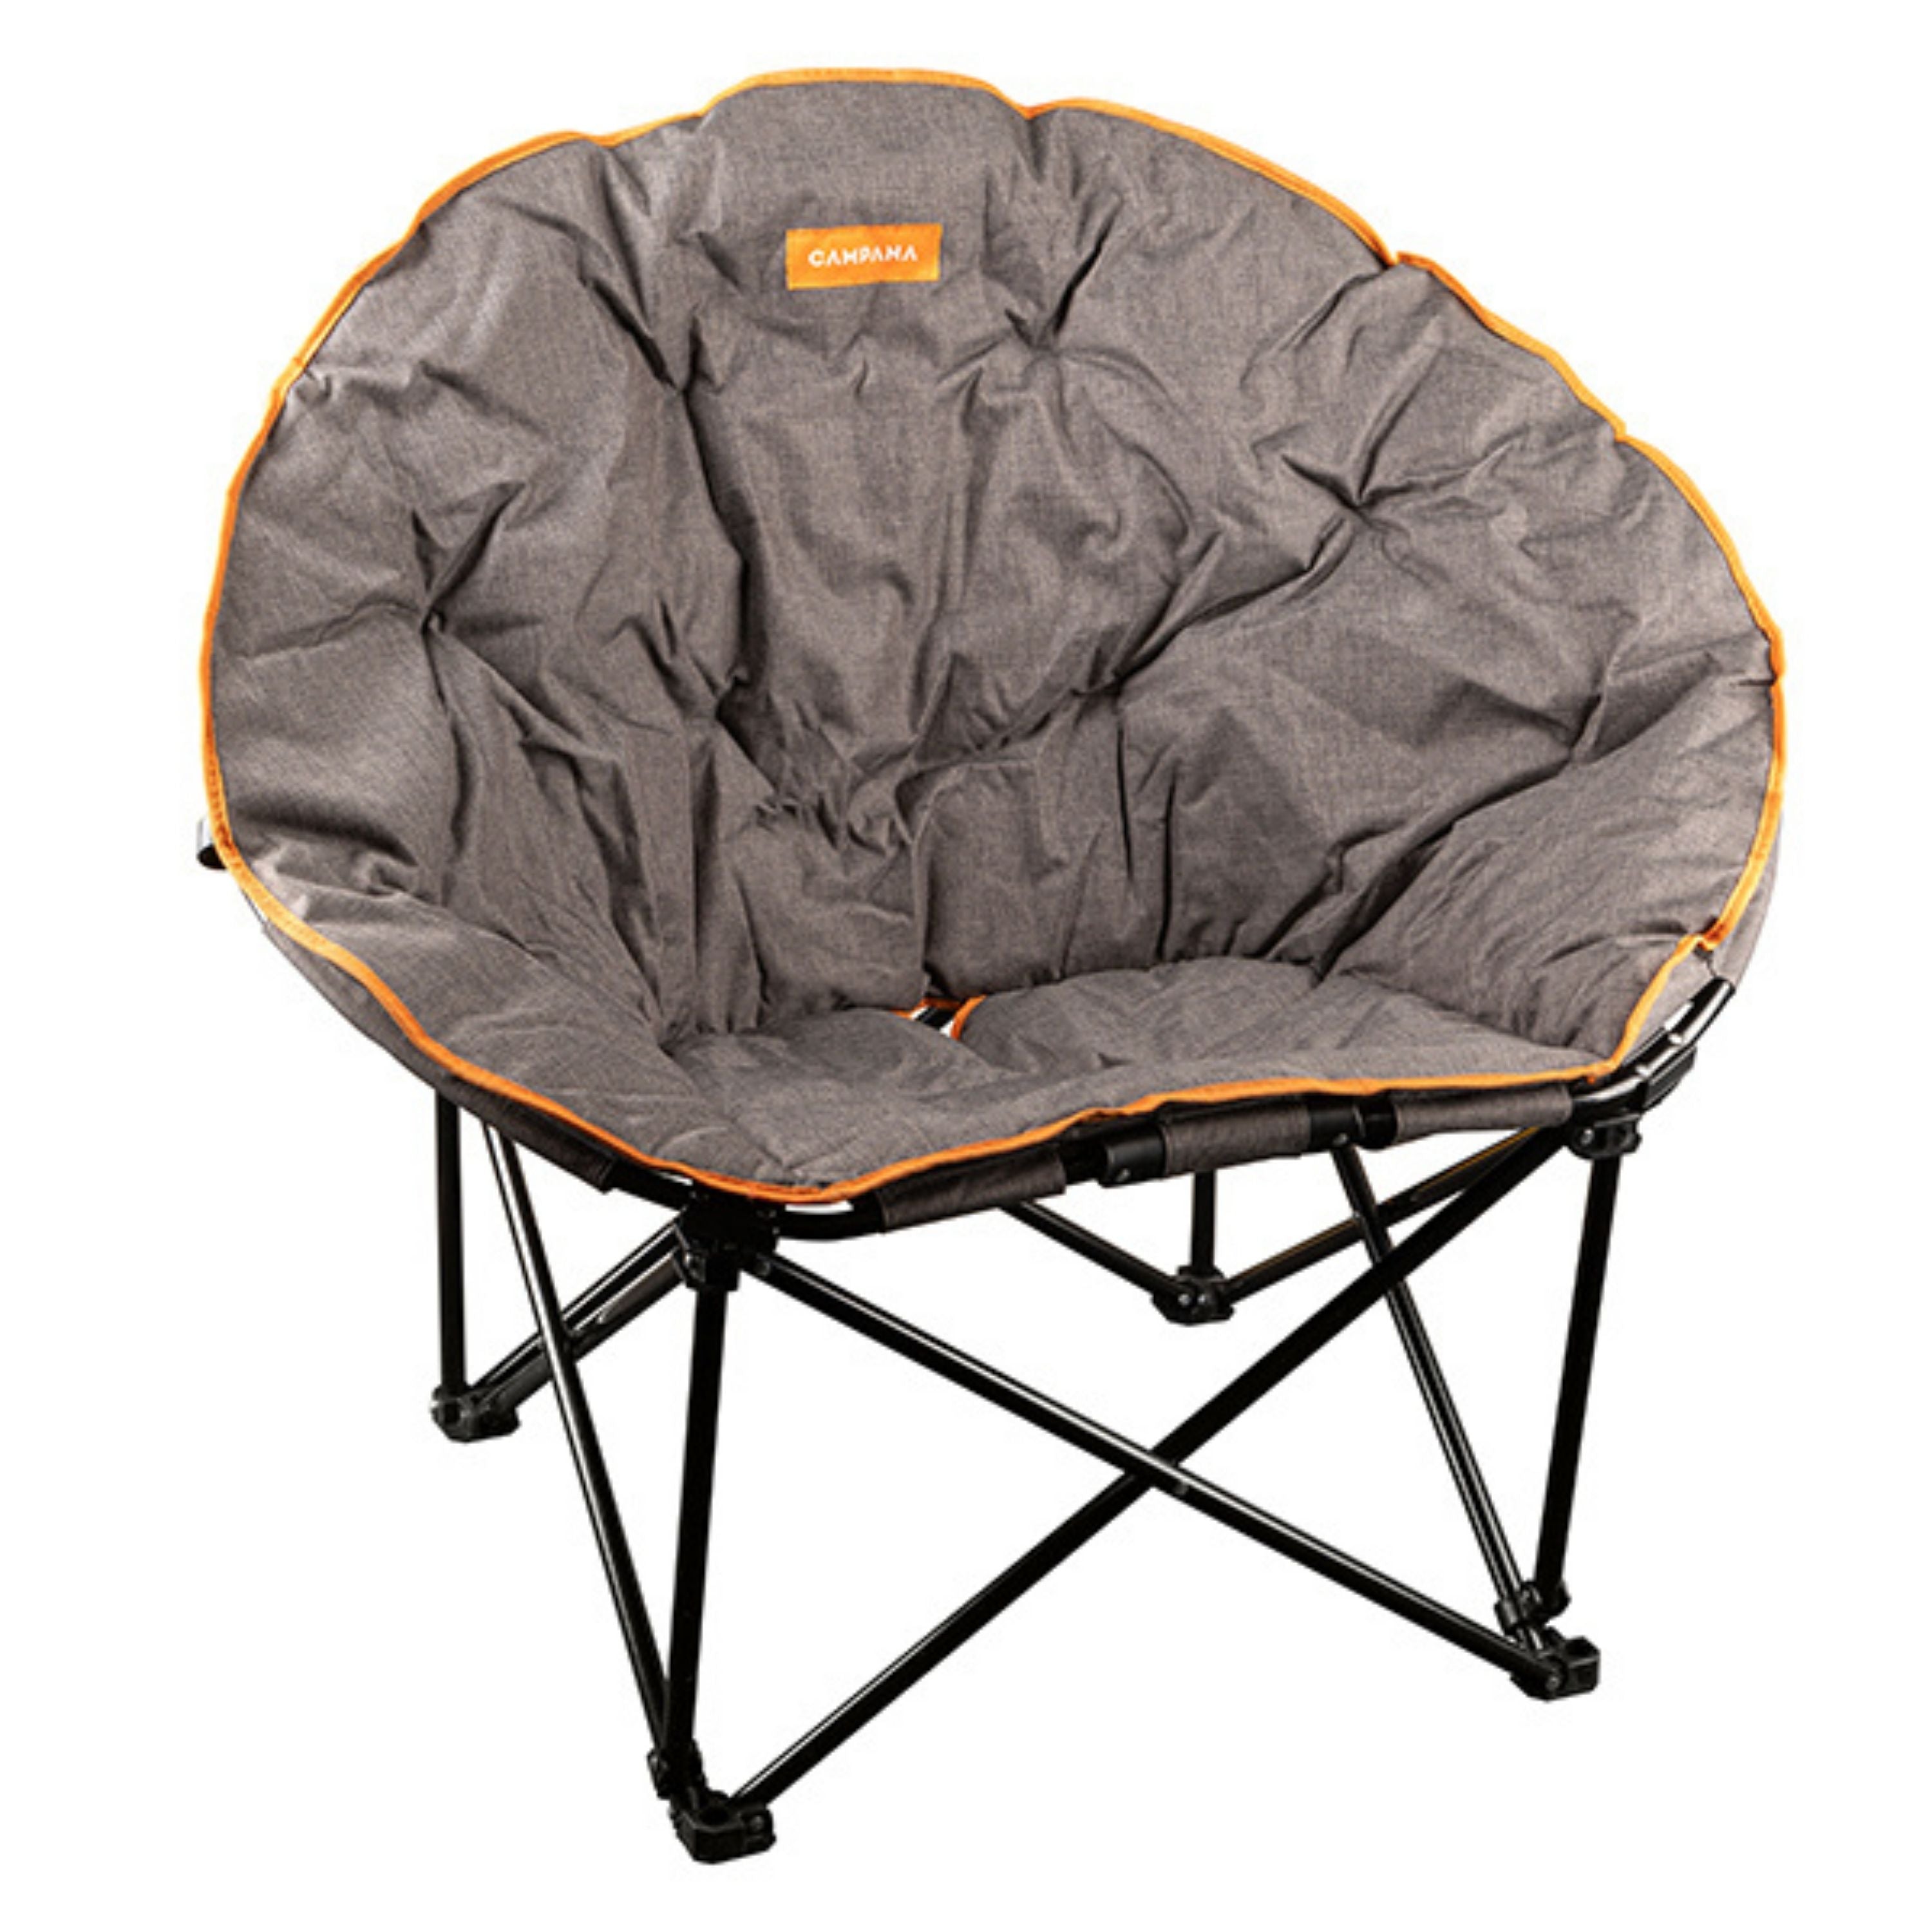 Deluxe Camping chair